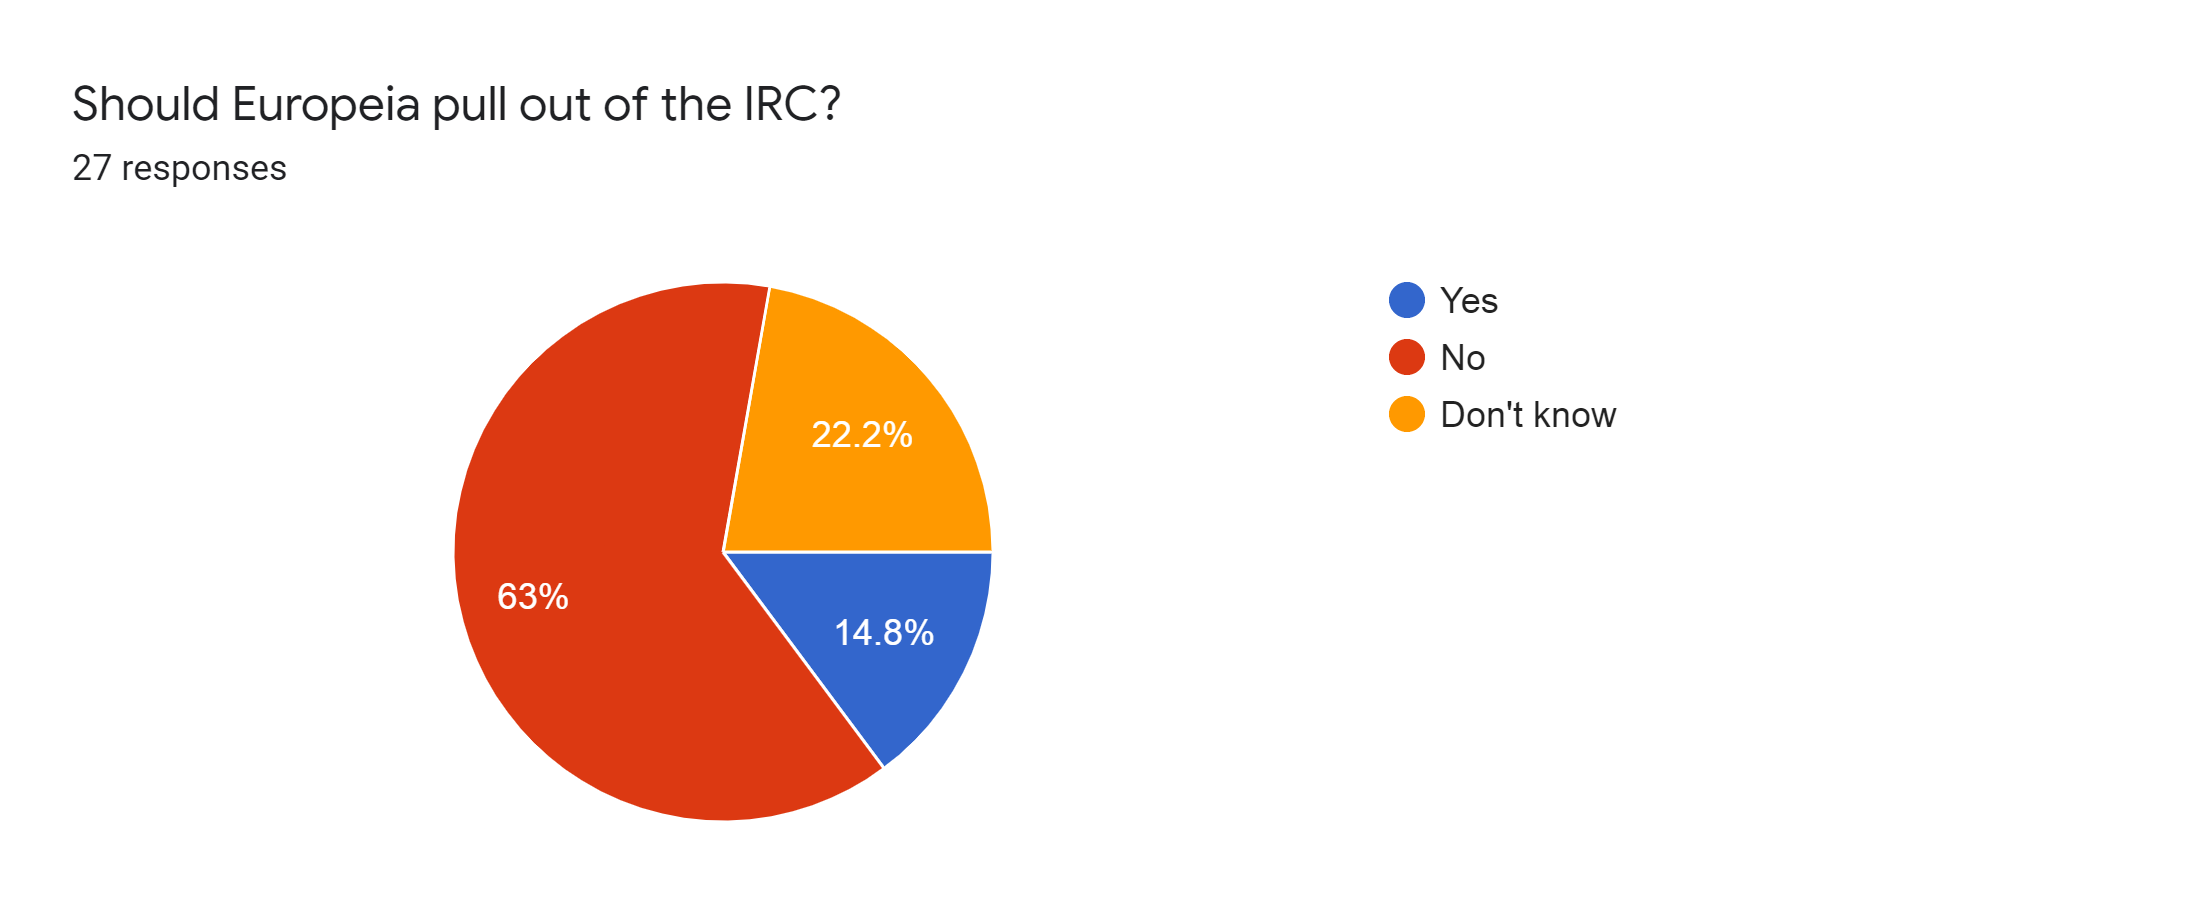 Forms response chart. Question title: Should Europeia pull out of the IRC?. Number of responses: 27 responses.